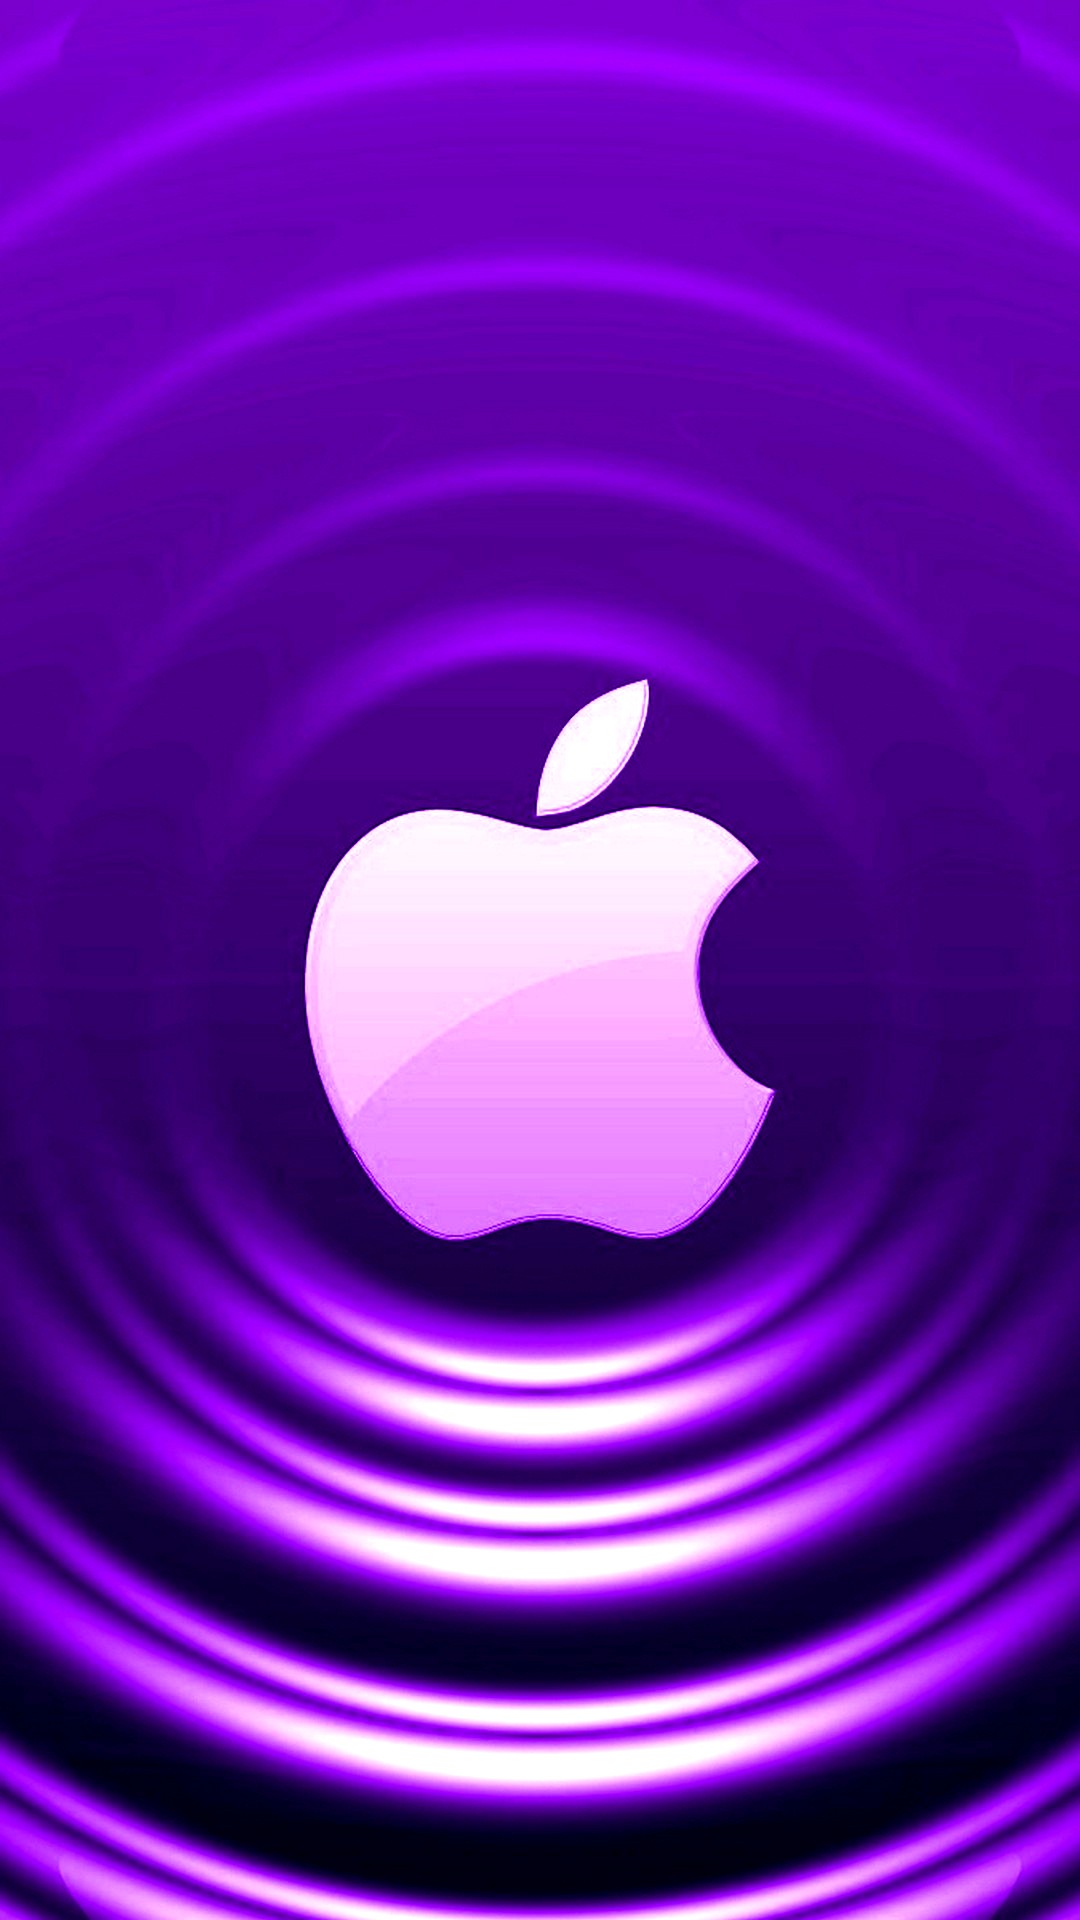 Purple iPhone Wallpaper Tumblr with high-resolution 1080x1920 pixel. You can set as wallpaper for Apple iPhone X, XS Max, XR, 8, 7, 6, SE, iPad. Enjoy and share your favorite HD wallpapers and background images